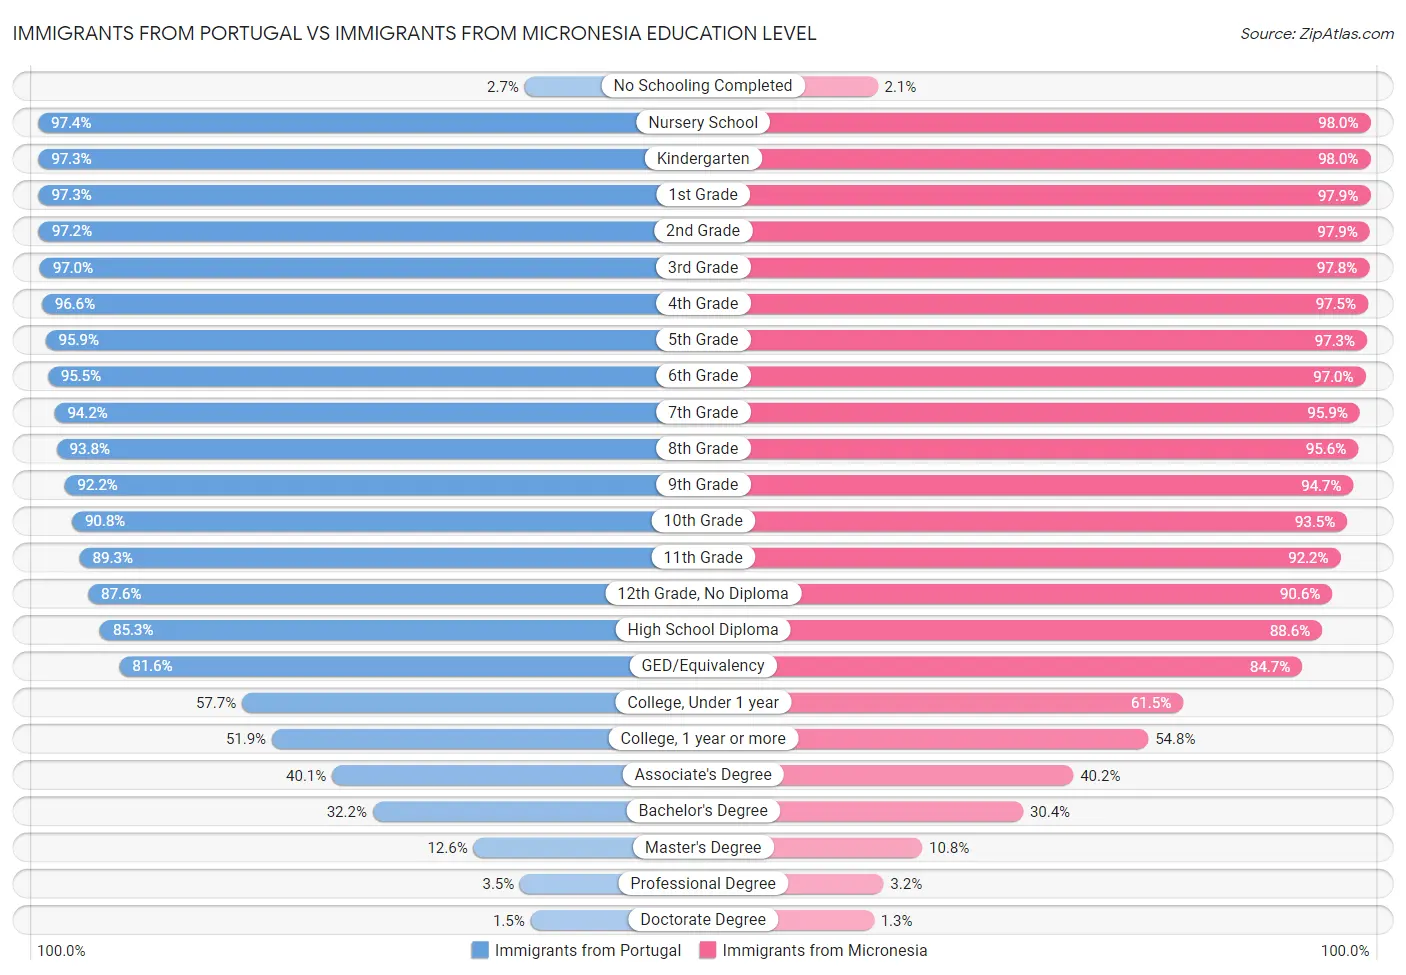 Immigrants from Portugal vs Immigrants from Micronesia Education Level